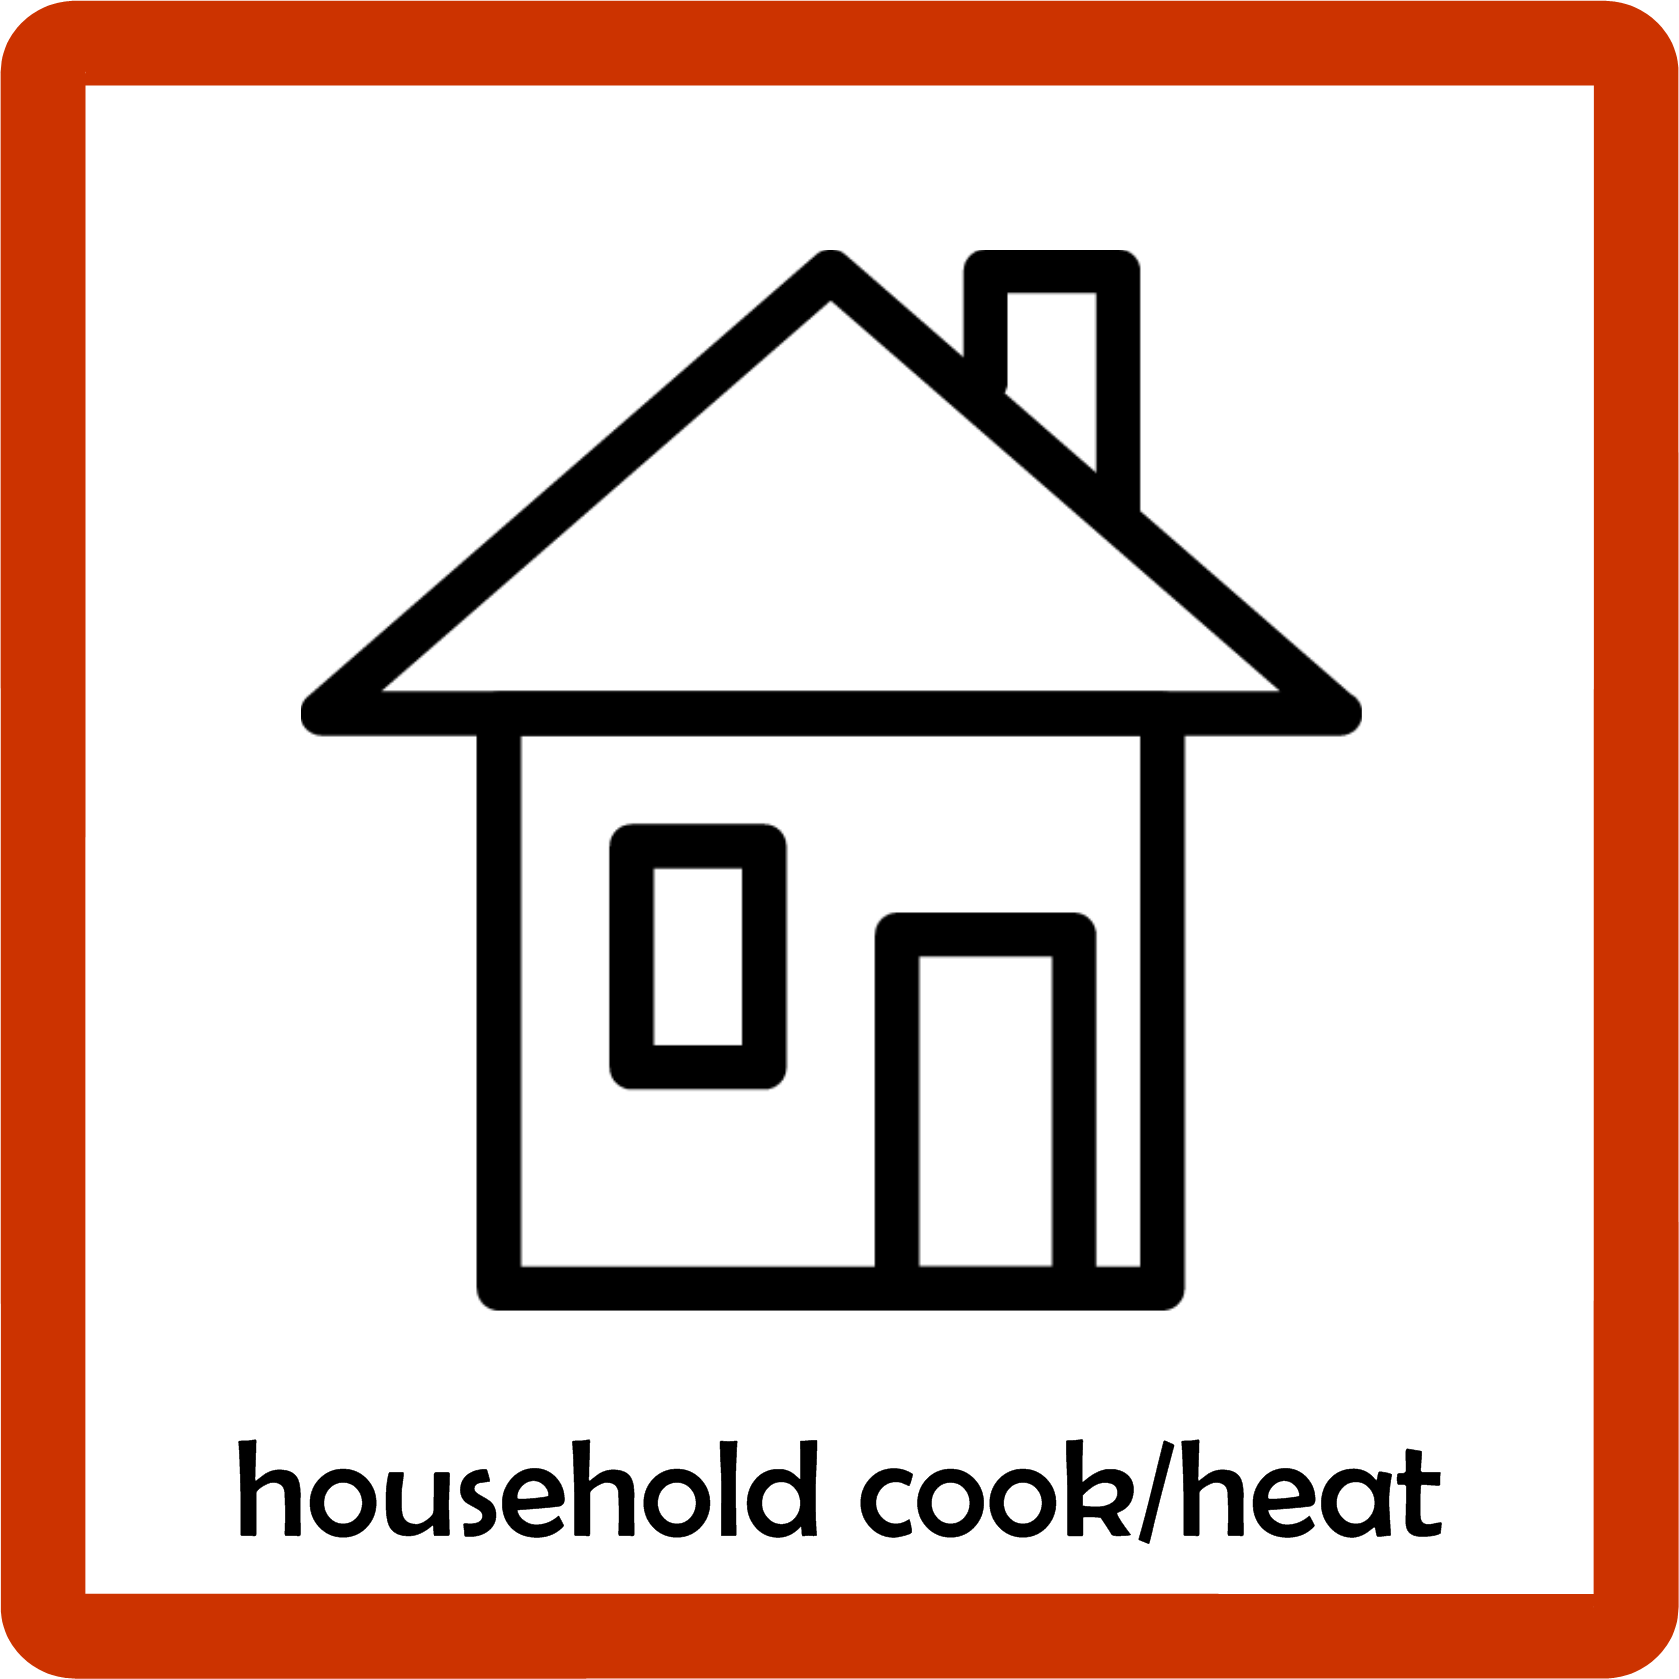 Cooking and Heating